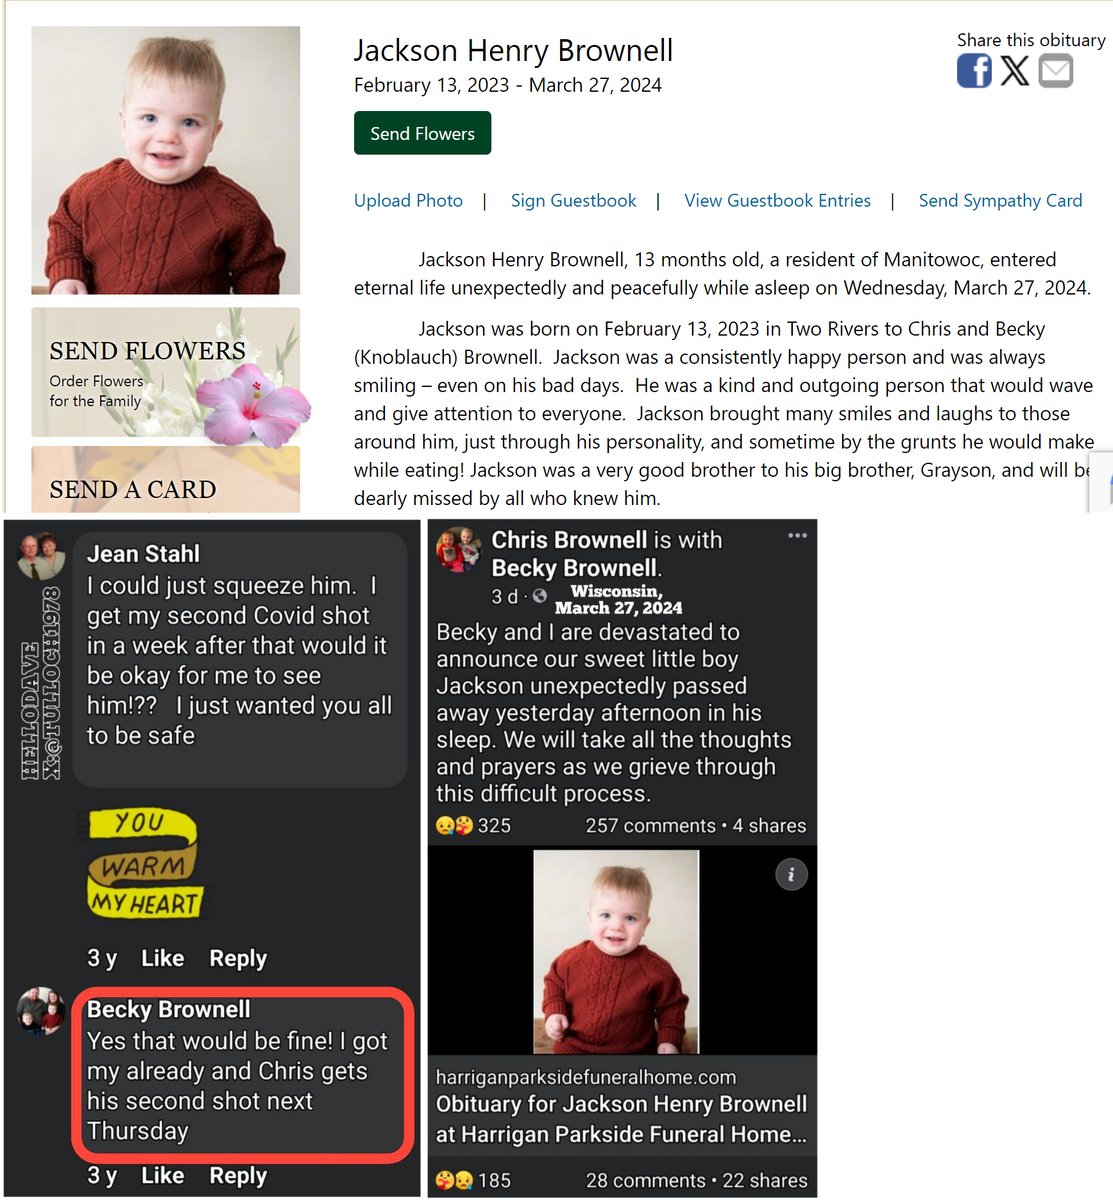 Manitowoc, WI - 13 month old Jackson Henry Brownell died unexpectedly in his sleep on March 27, 2024.

His mom was obsessed with COVID-19 mRNA Vaccines.

Vast majority of SIDS (Sudden Infant Death Syndrome) and sudden deaths of young children are caused by childhood vaccines,…